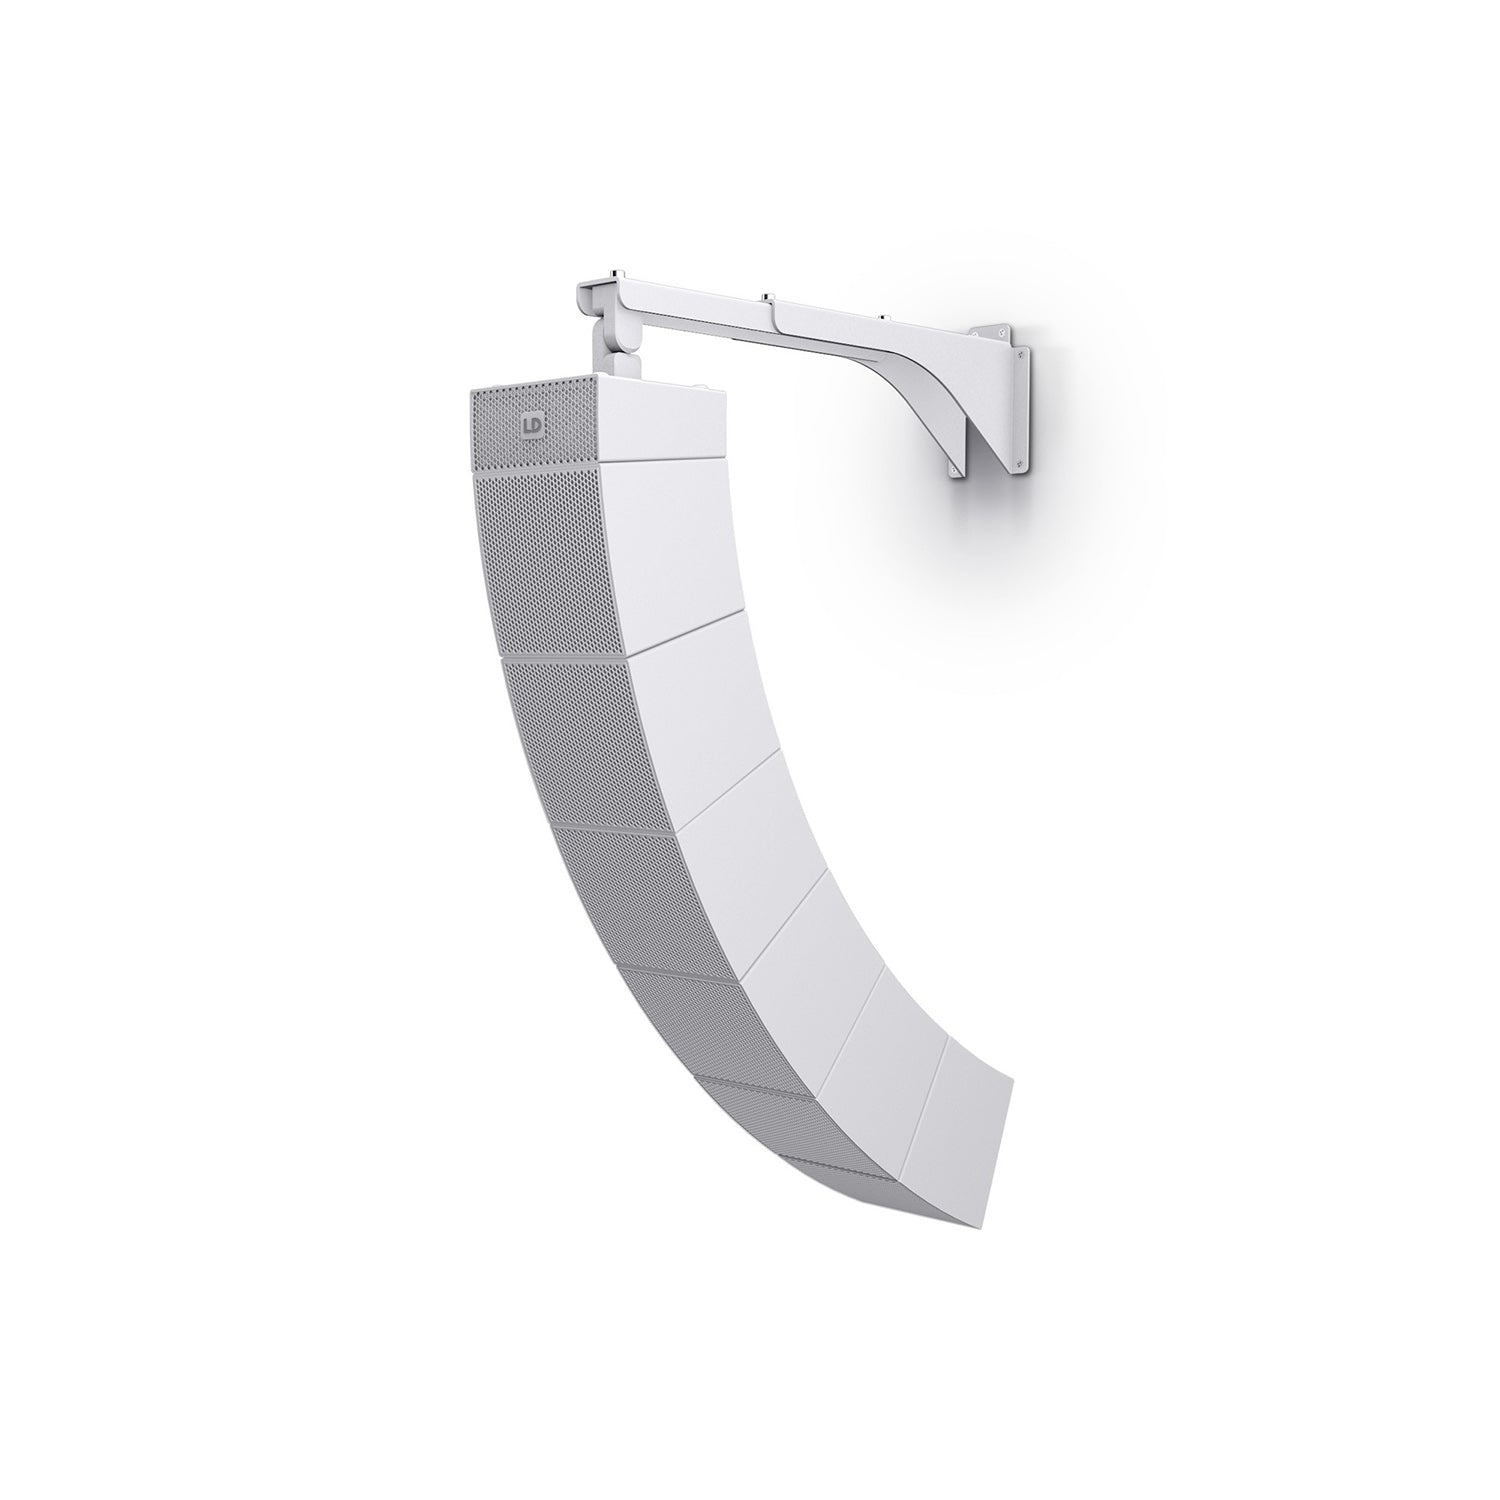 LD Systems CURV 500 WM BL W, Curv 500 Tilt and Swivel Wall Mount Bracket for Up to 6 Satellites - White - Hollywood DJ